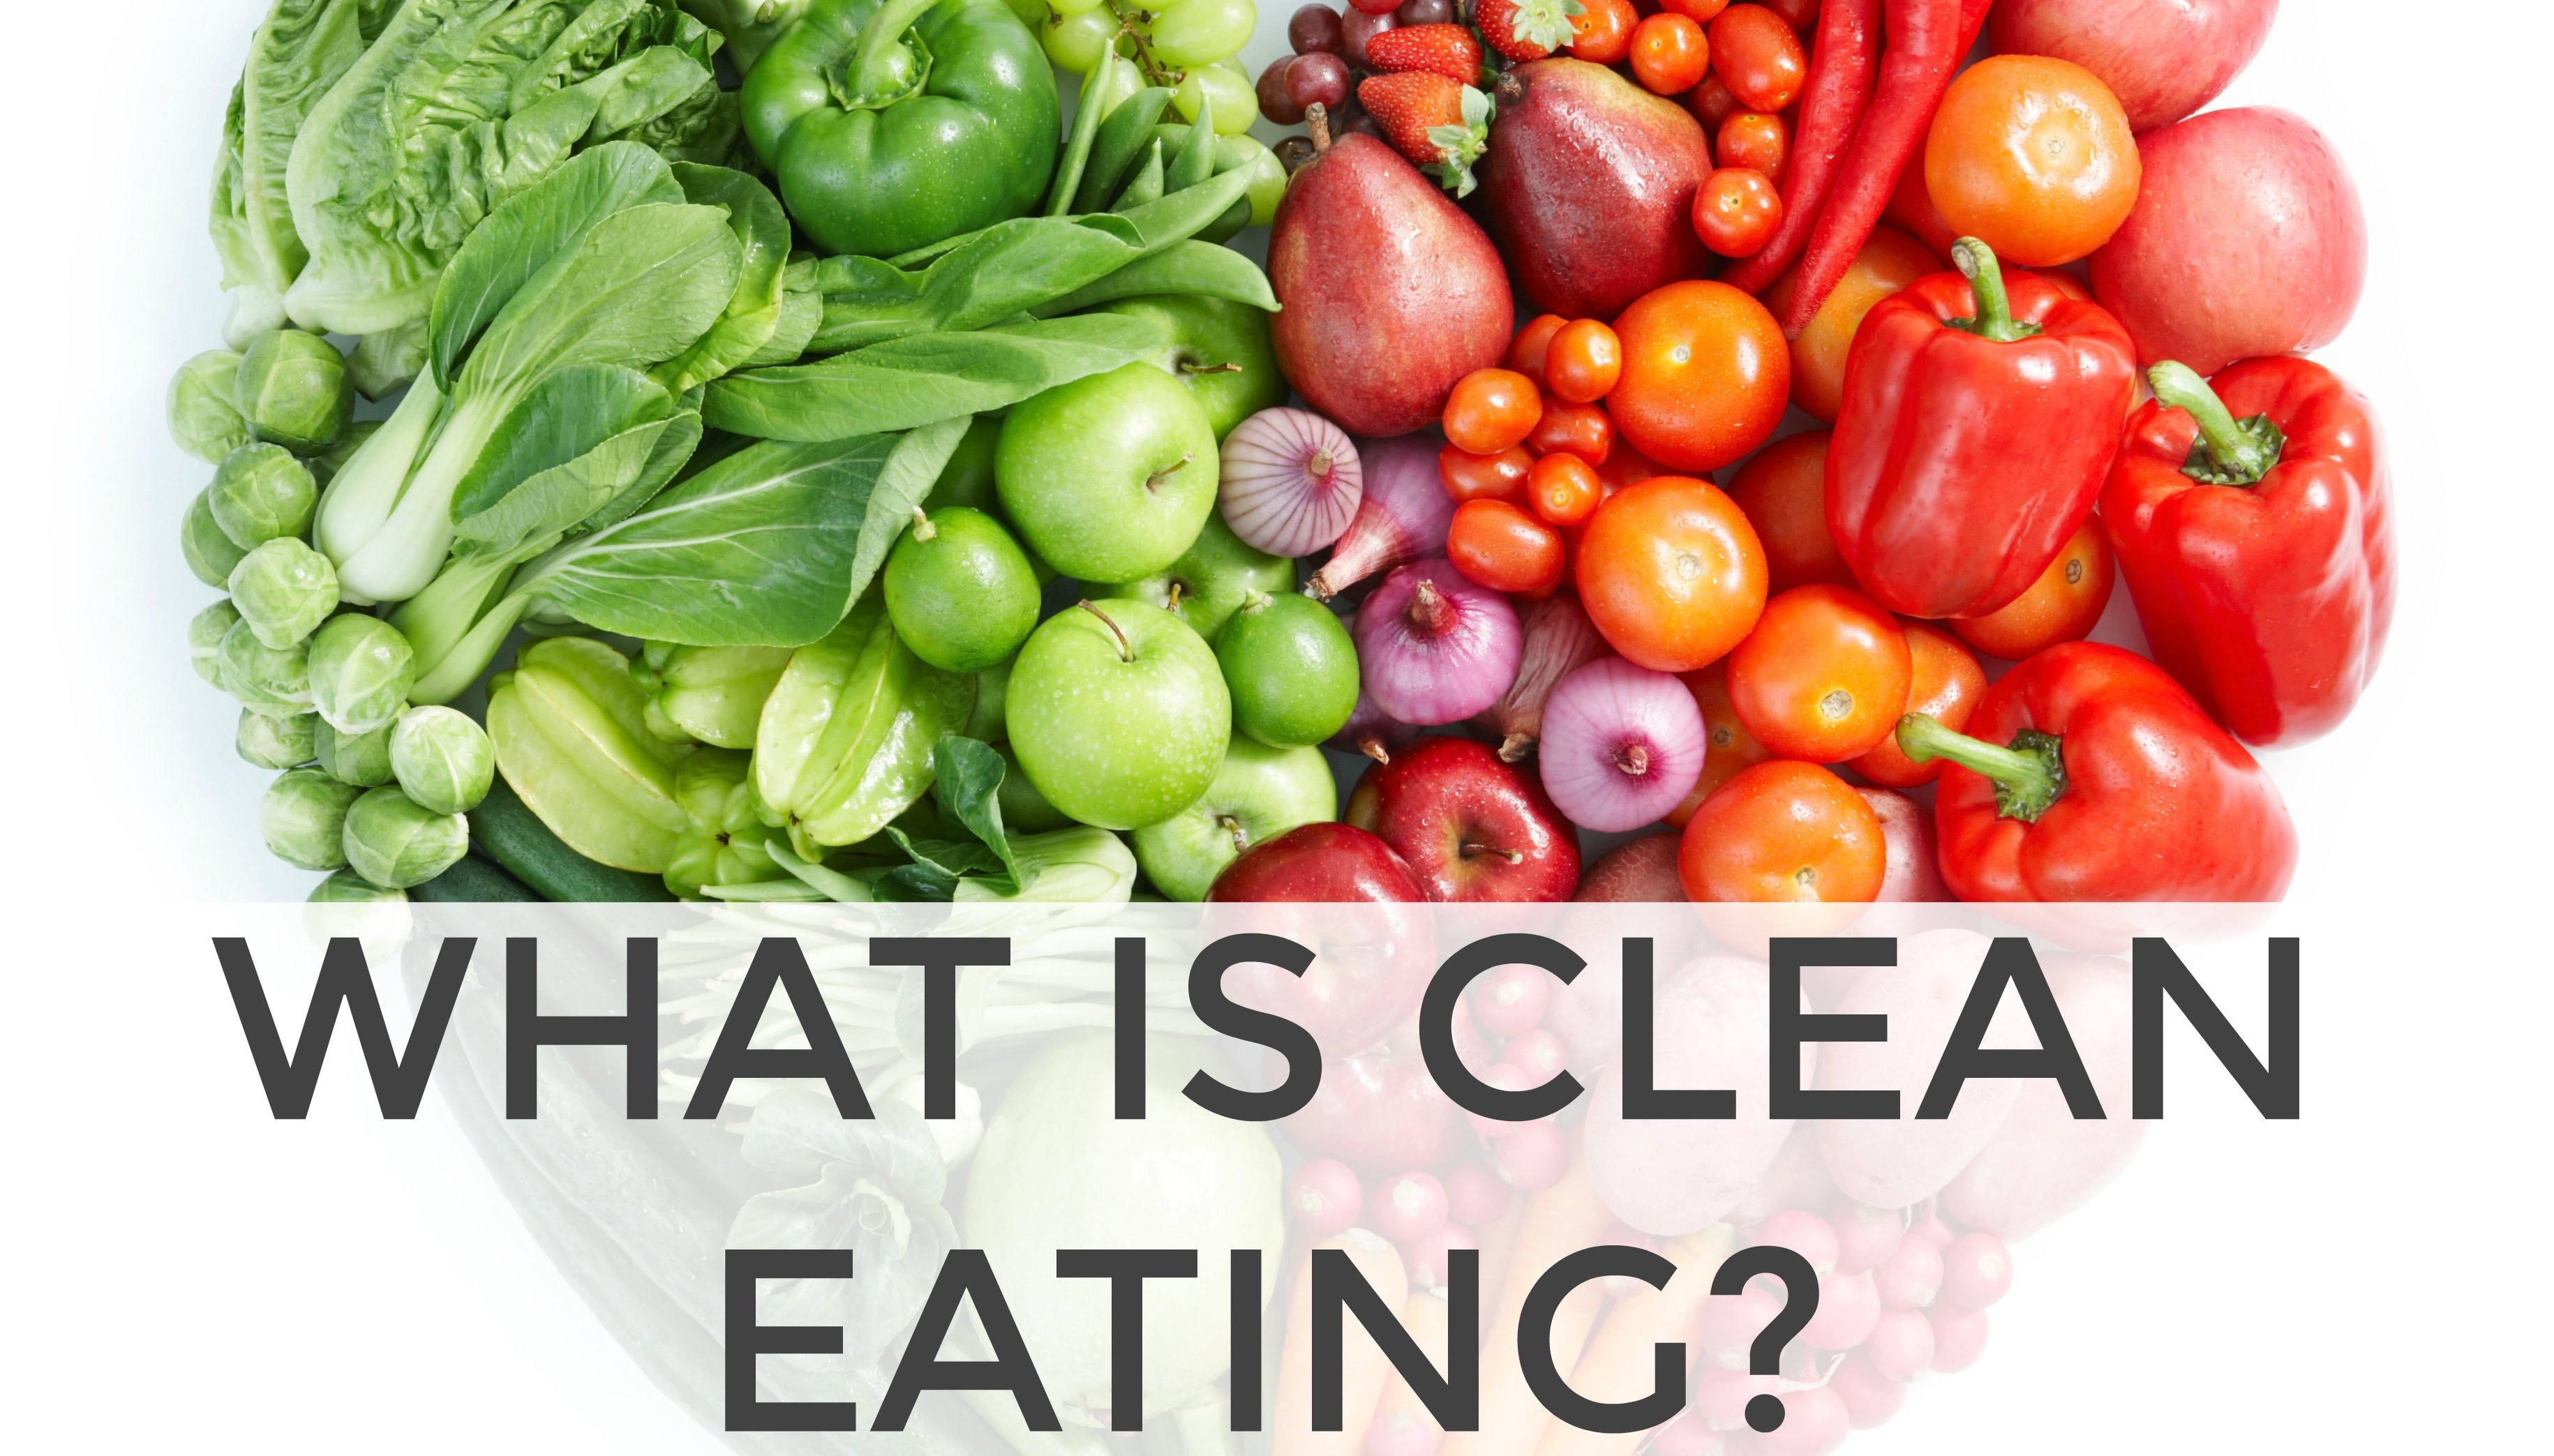 What is Clean Eating with 5 Simple Guidelines